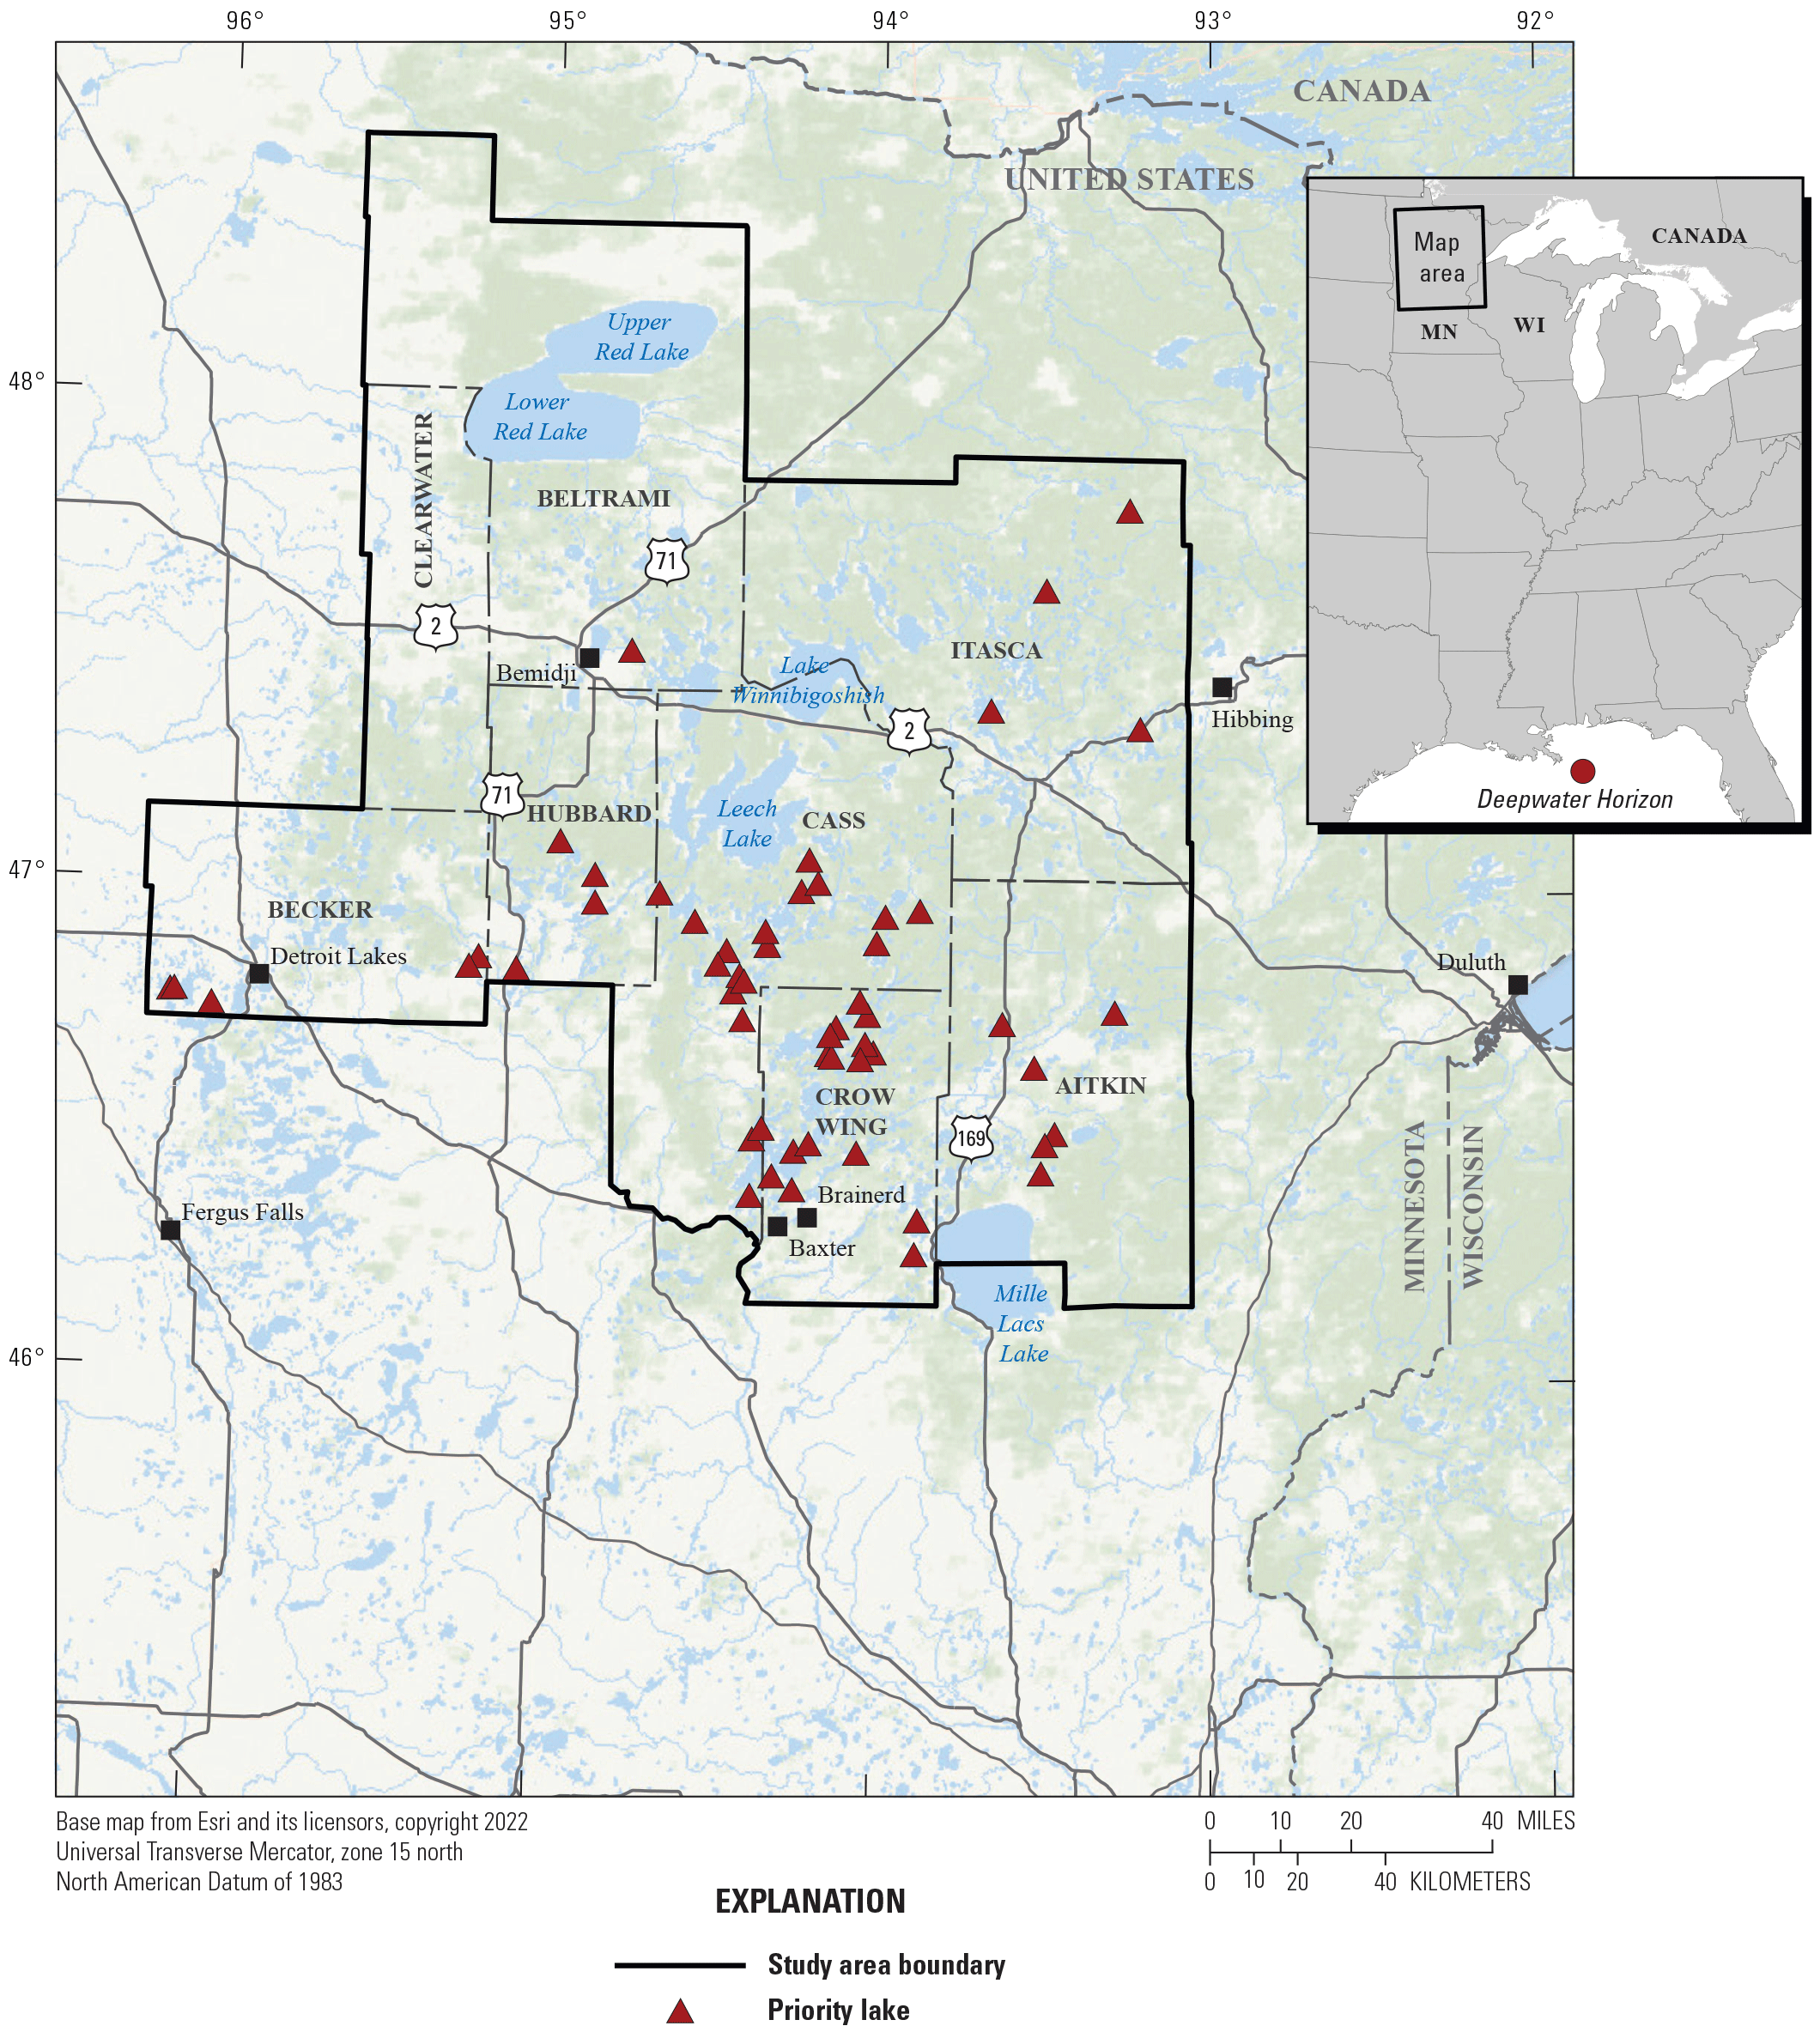 Priority lakes are mostly in the southern one-half of the study area.